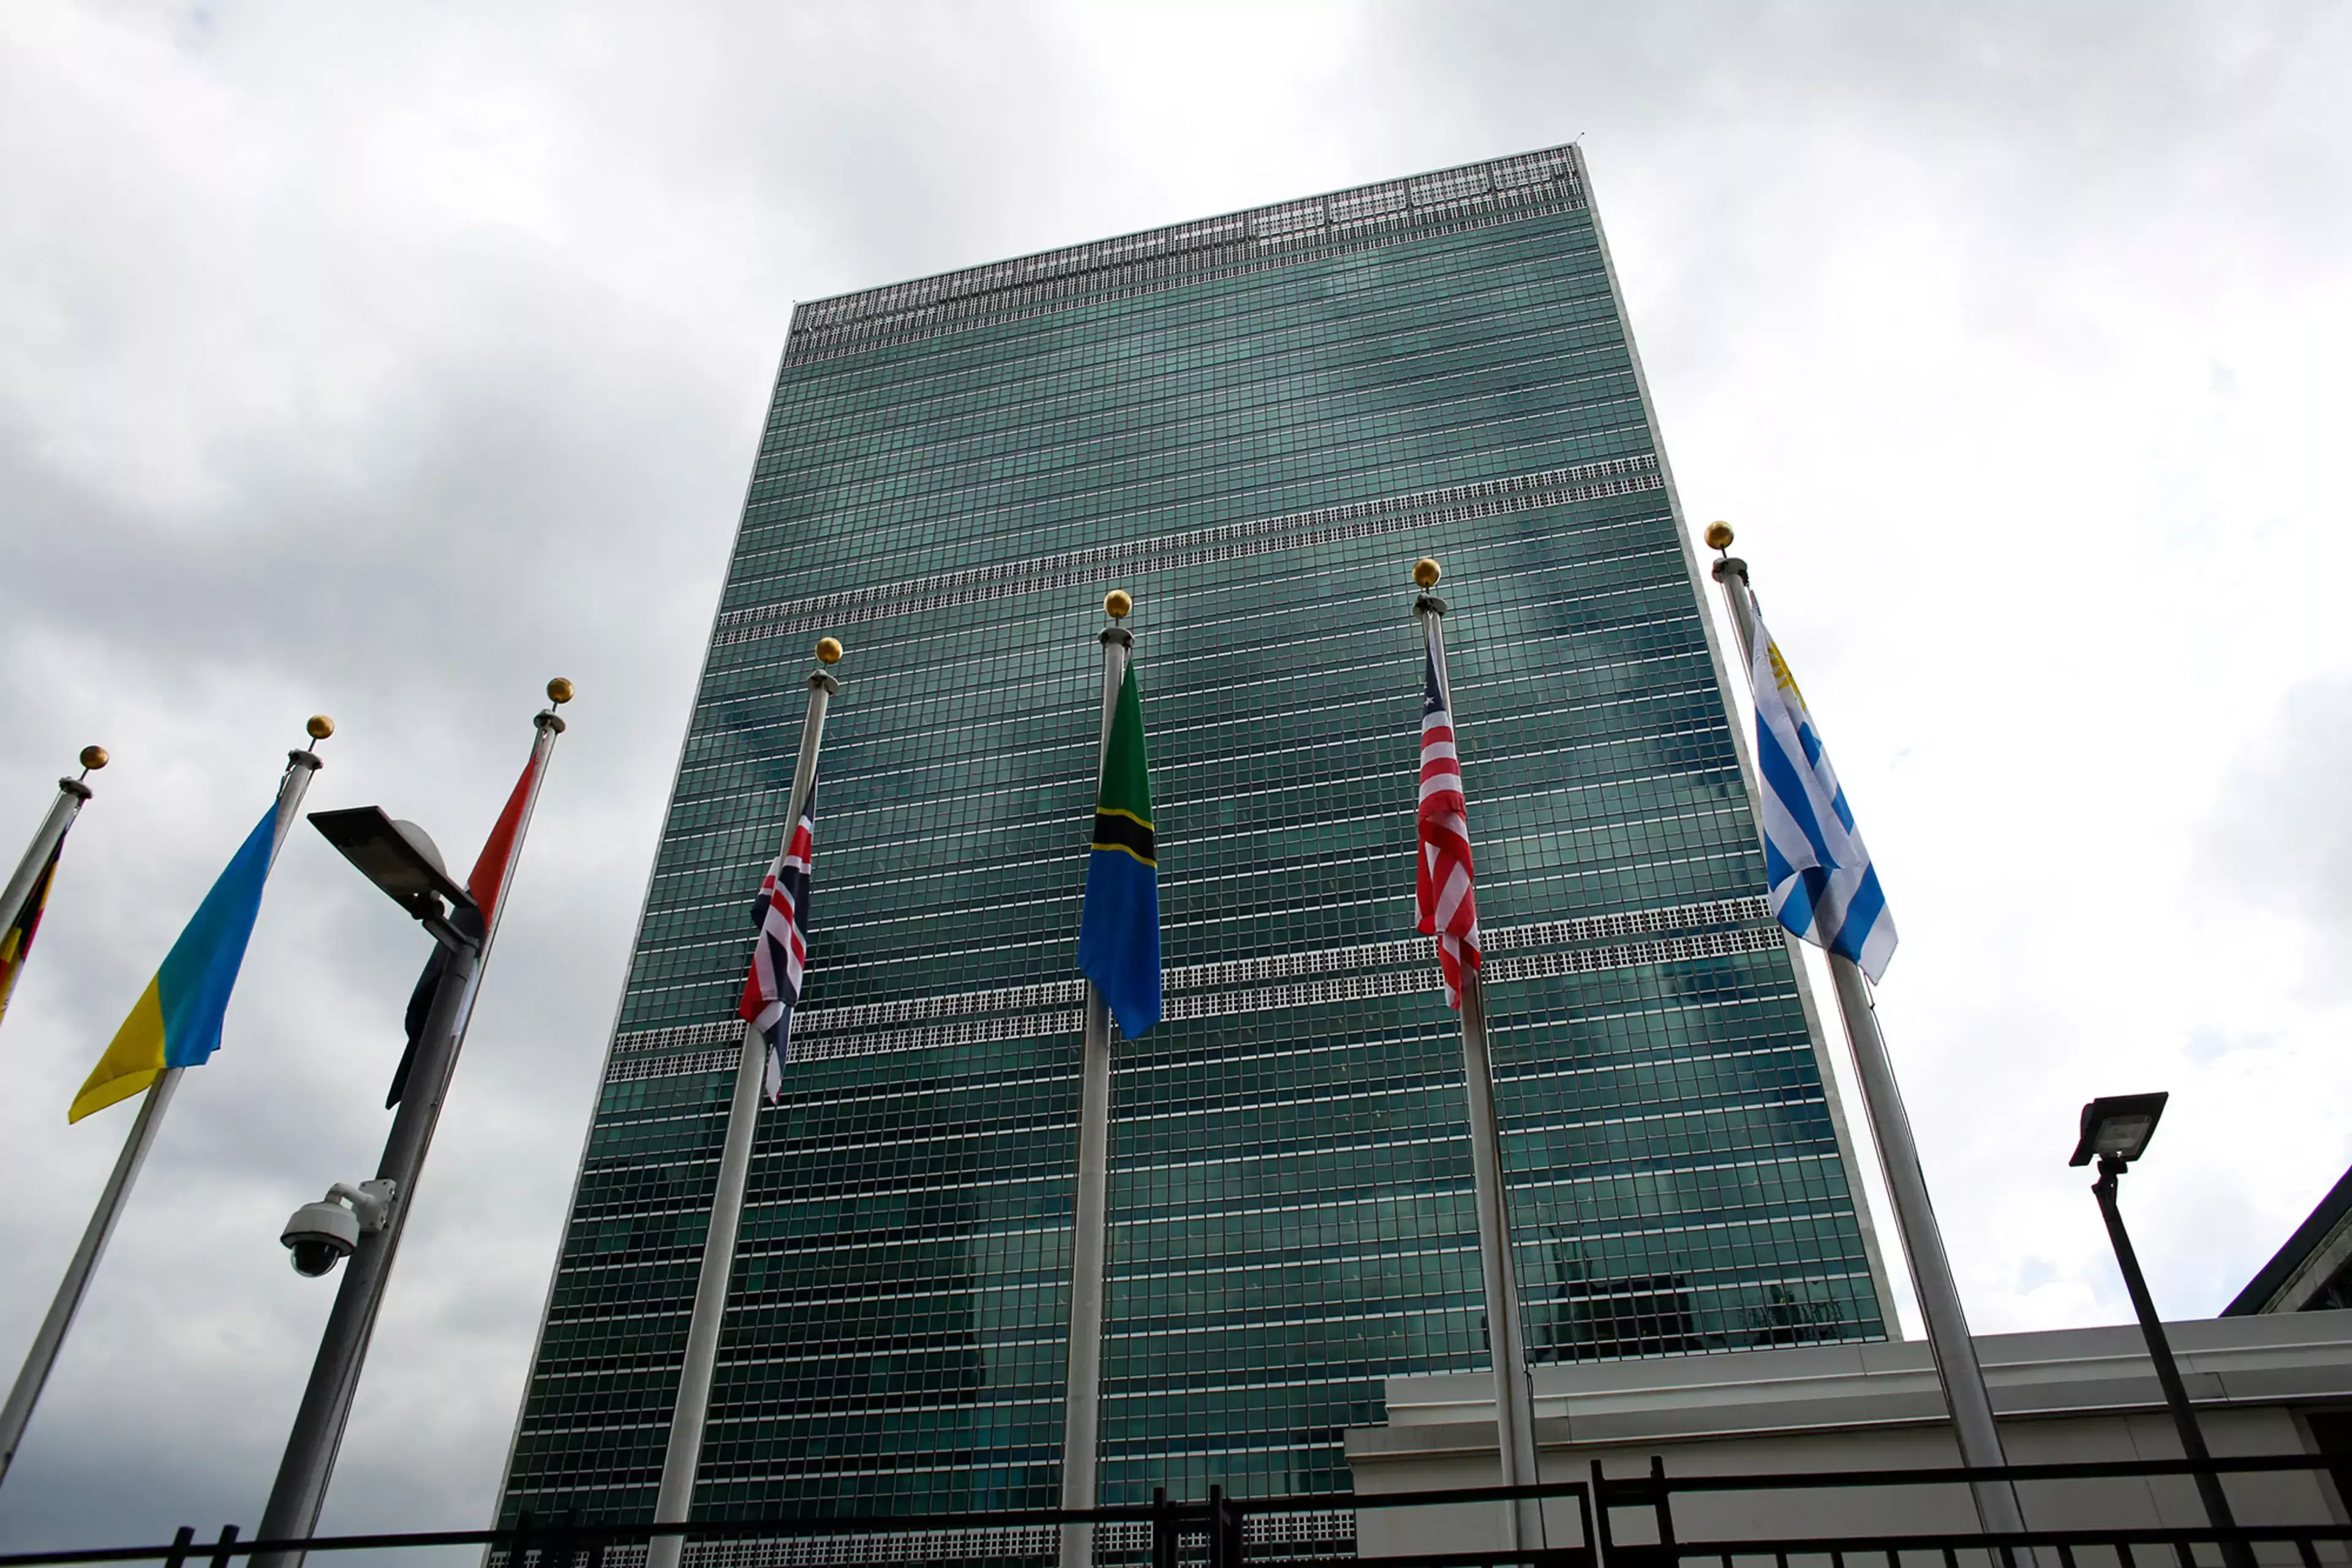 An exterior view of the United Nations headquarters in New York, New York.